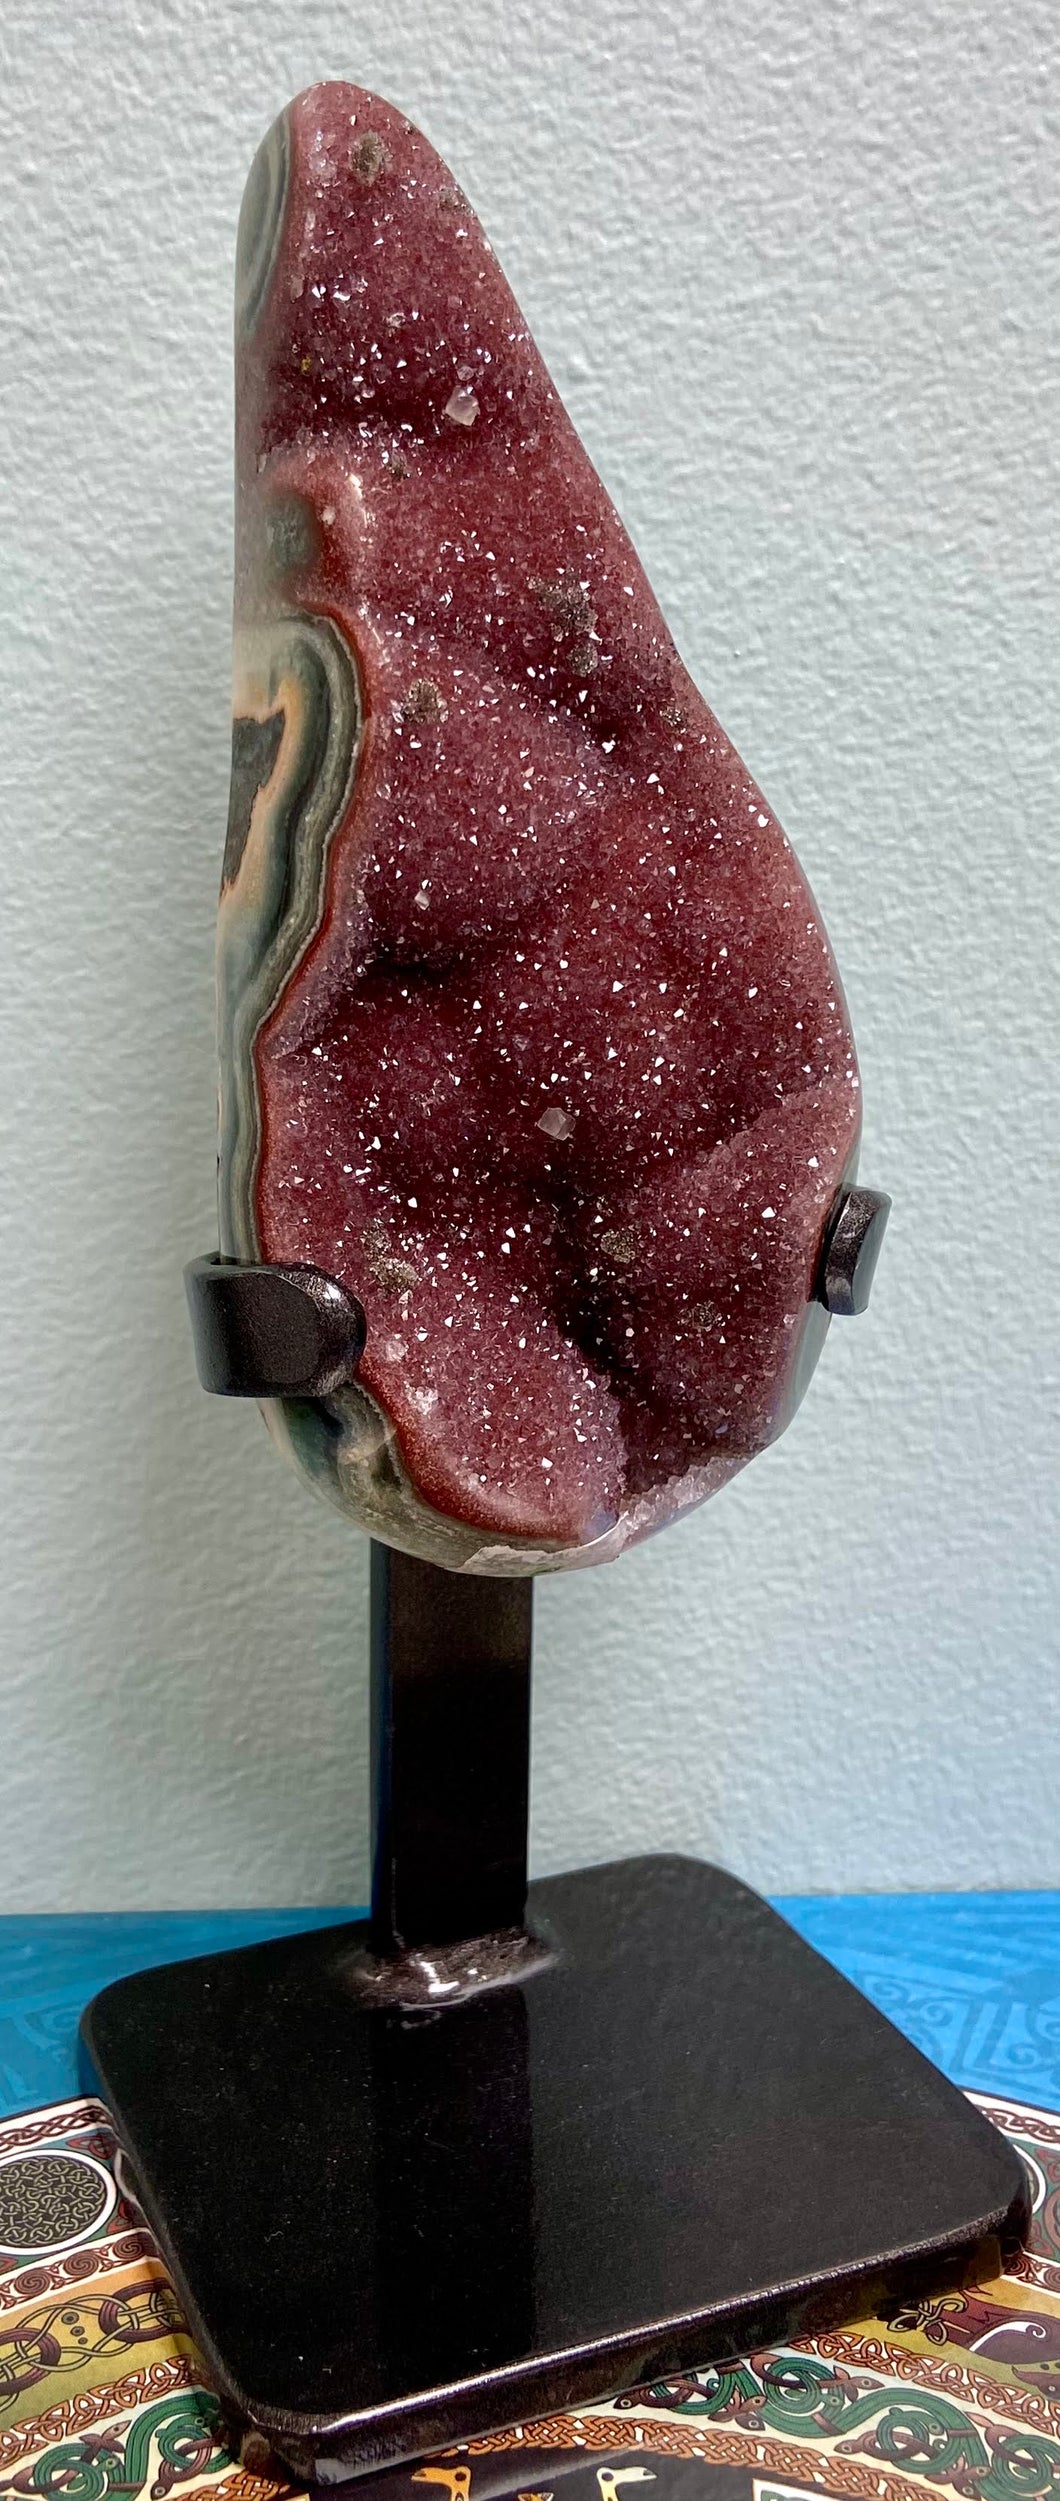 Red Amethyst Druzy w/ Calcite Growths on Metal Stand